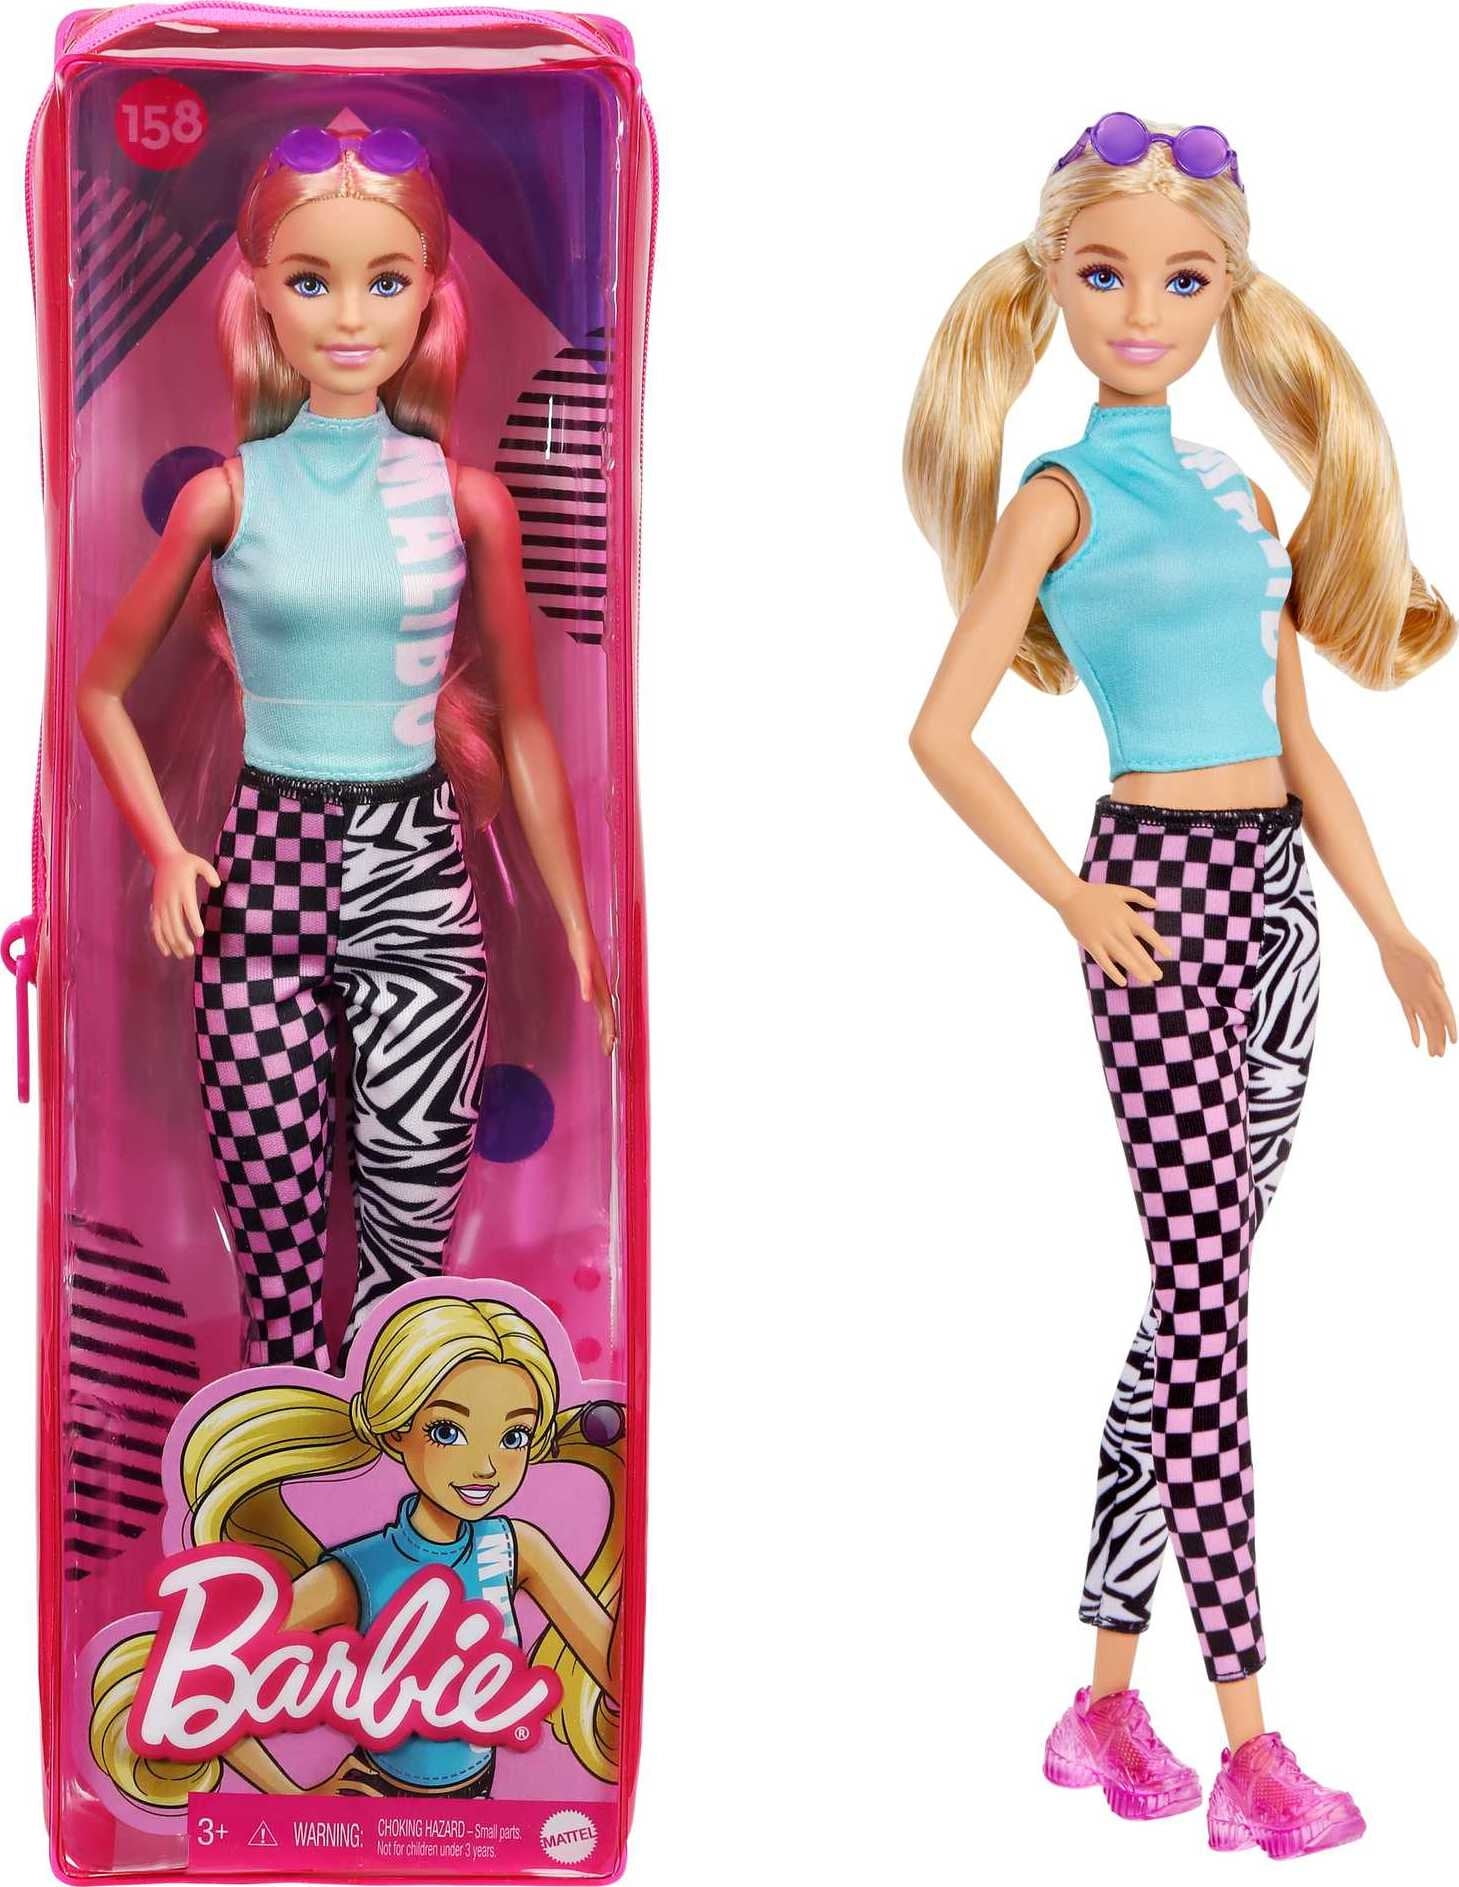 Barbie Fashionistas Doll #158 in Teal Top Leggings with Pigtails, Sneakers & - Walmart.com